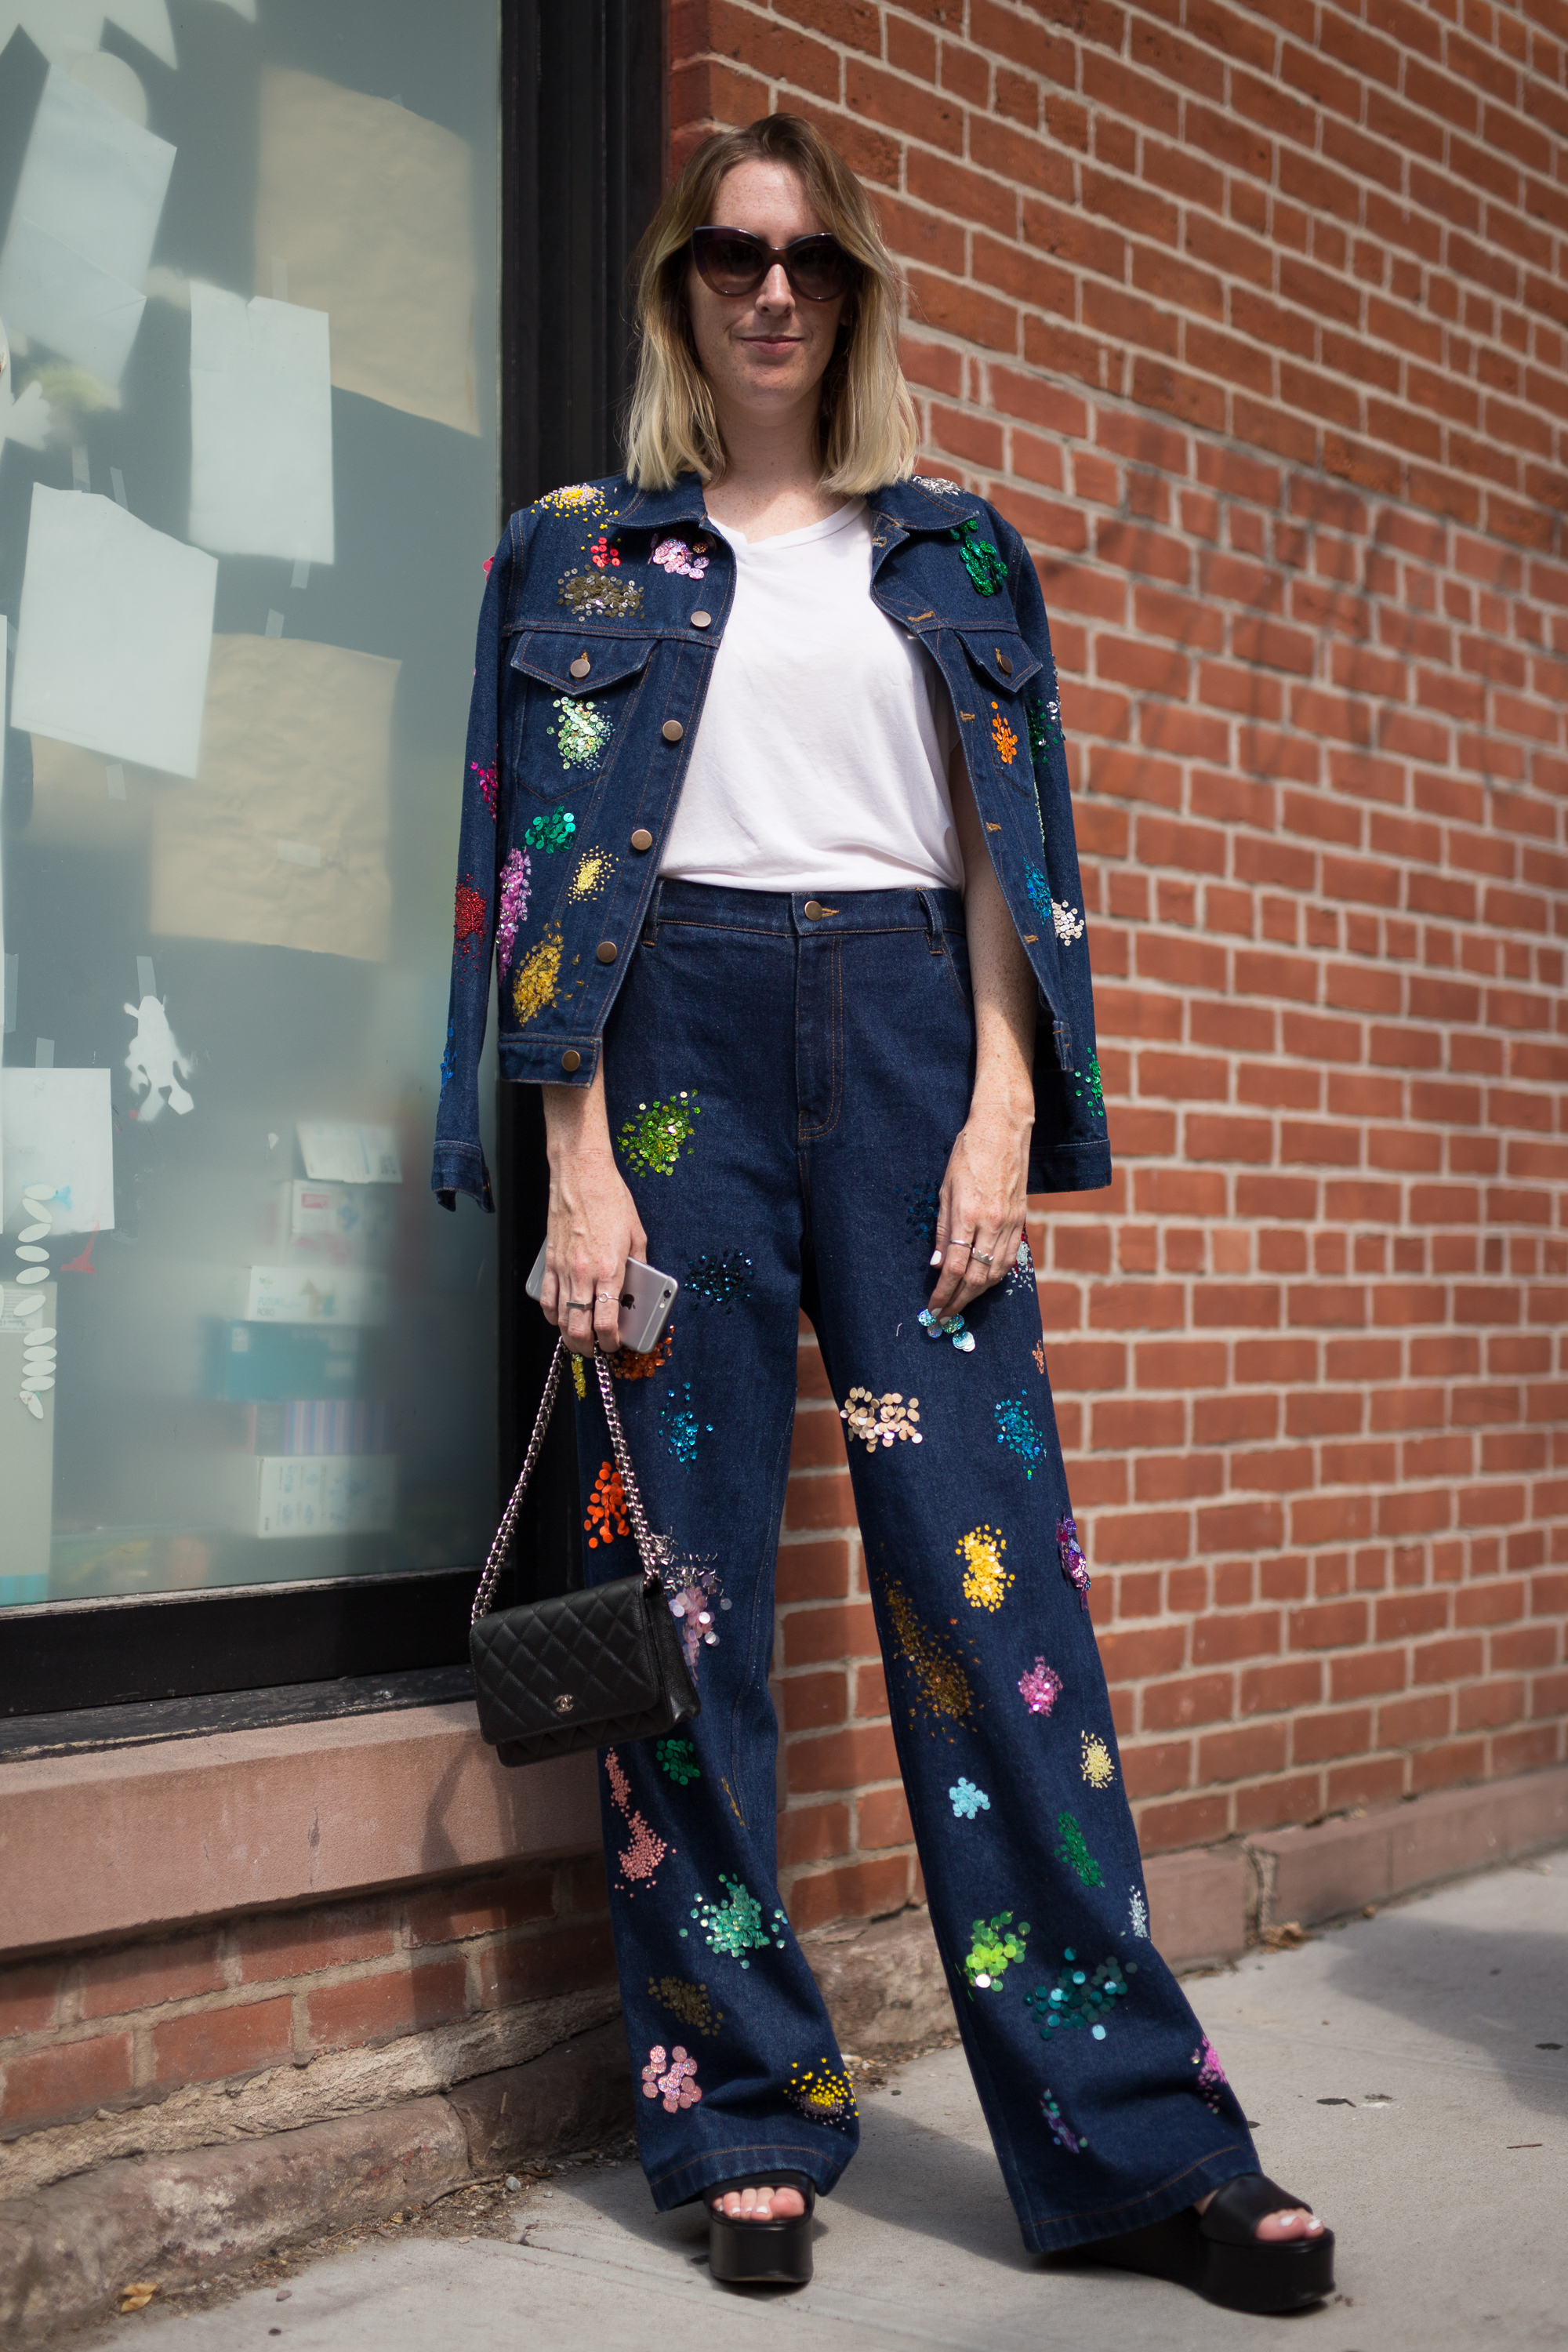 Sarah Owen's dark blue Canadian tuxedo got a playful update with colorful splashes of "paint" embellishment.